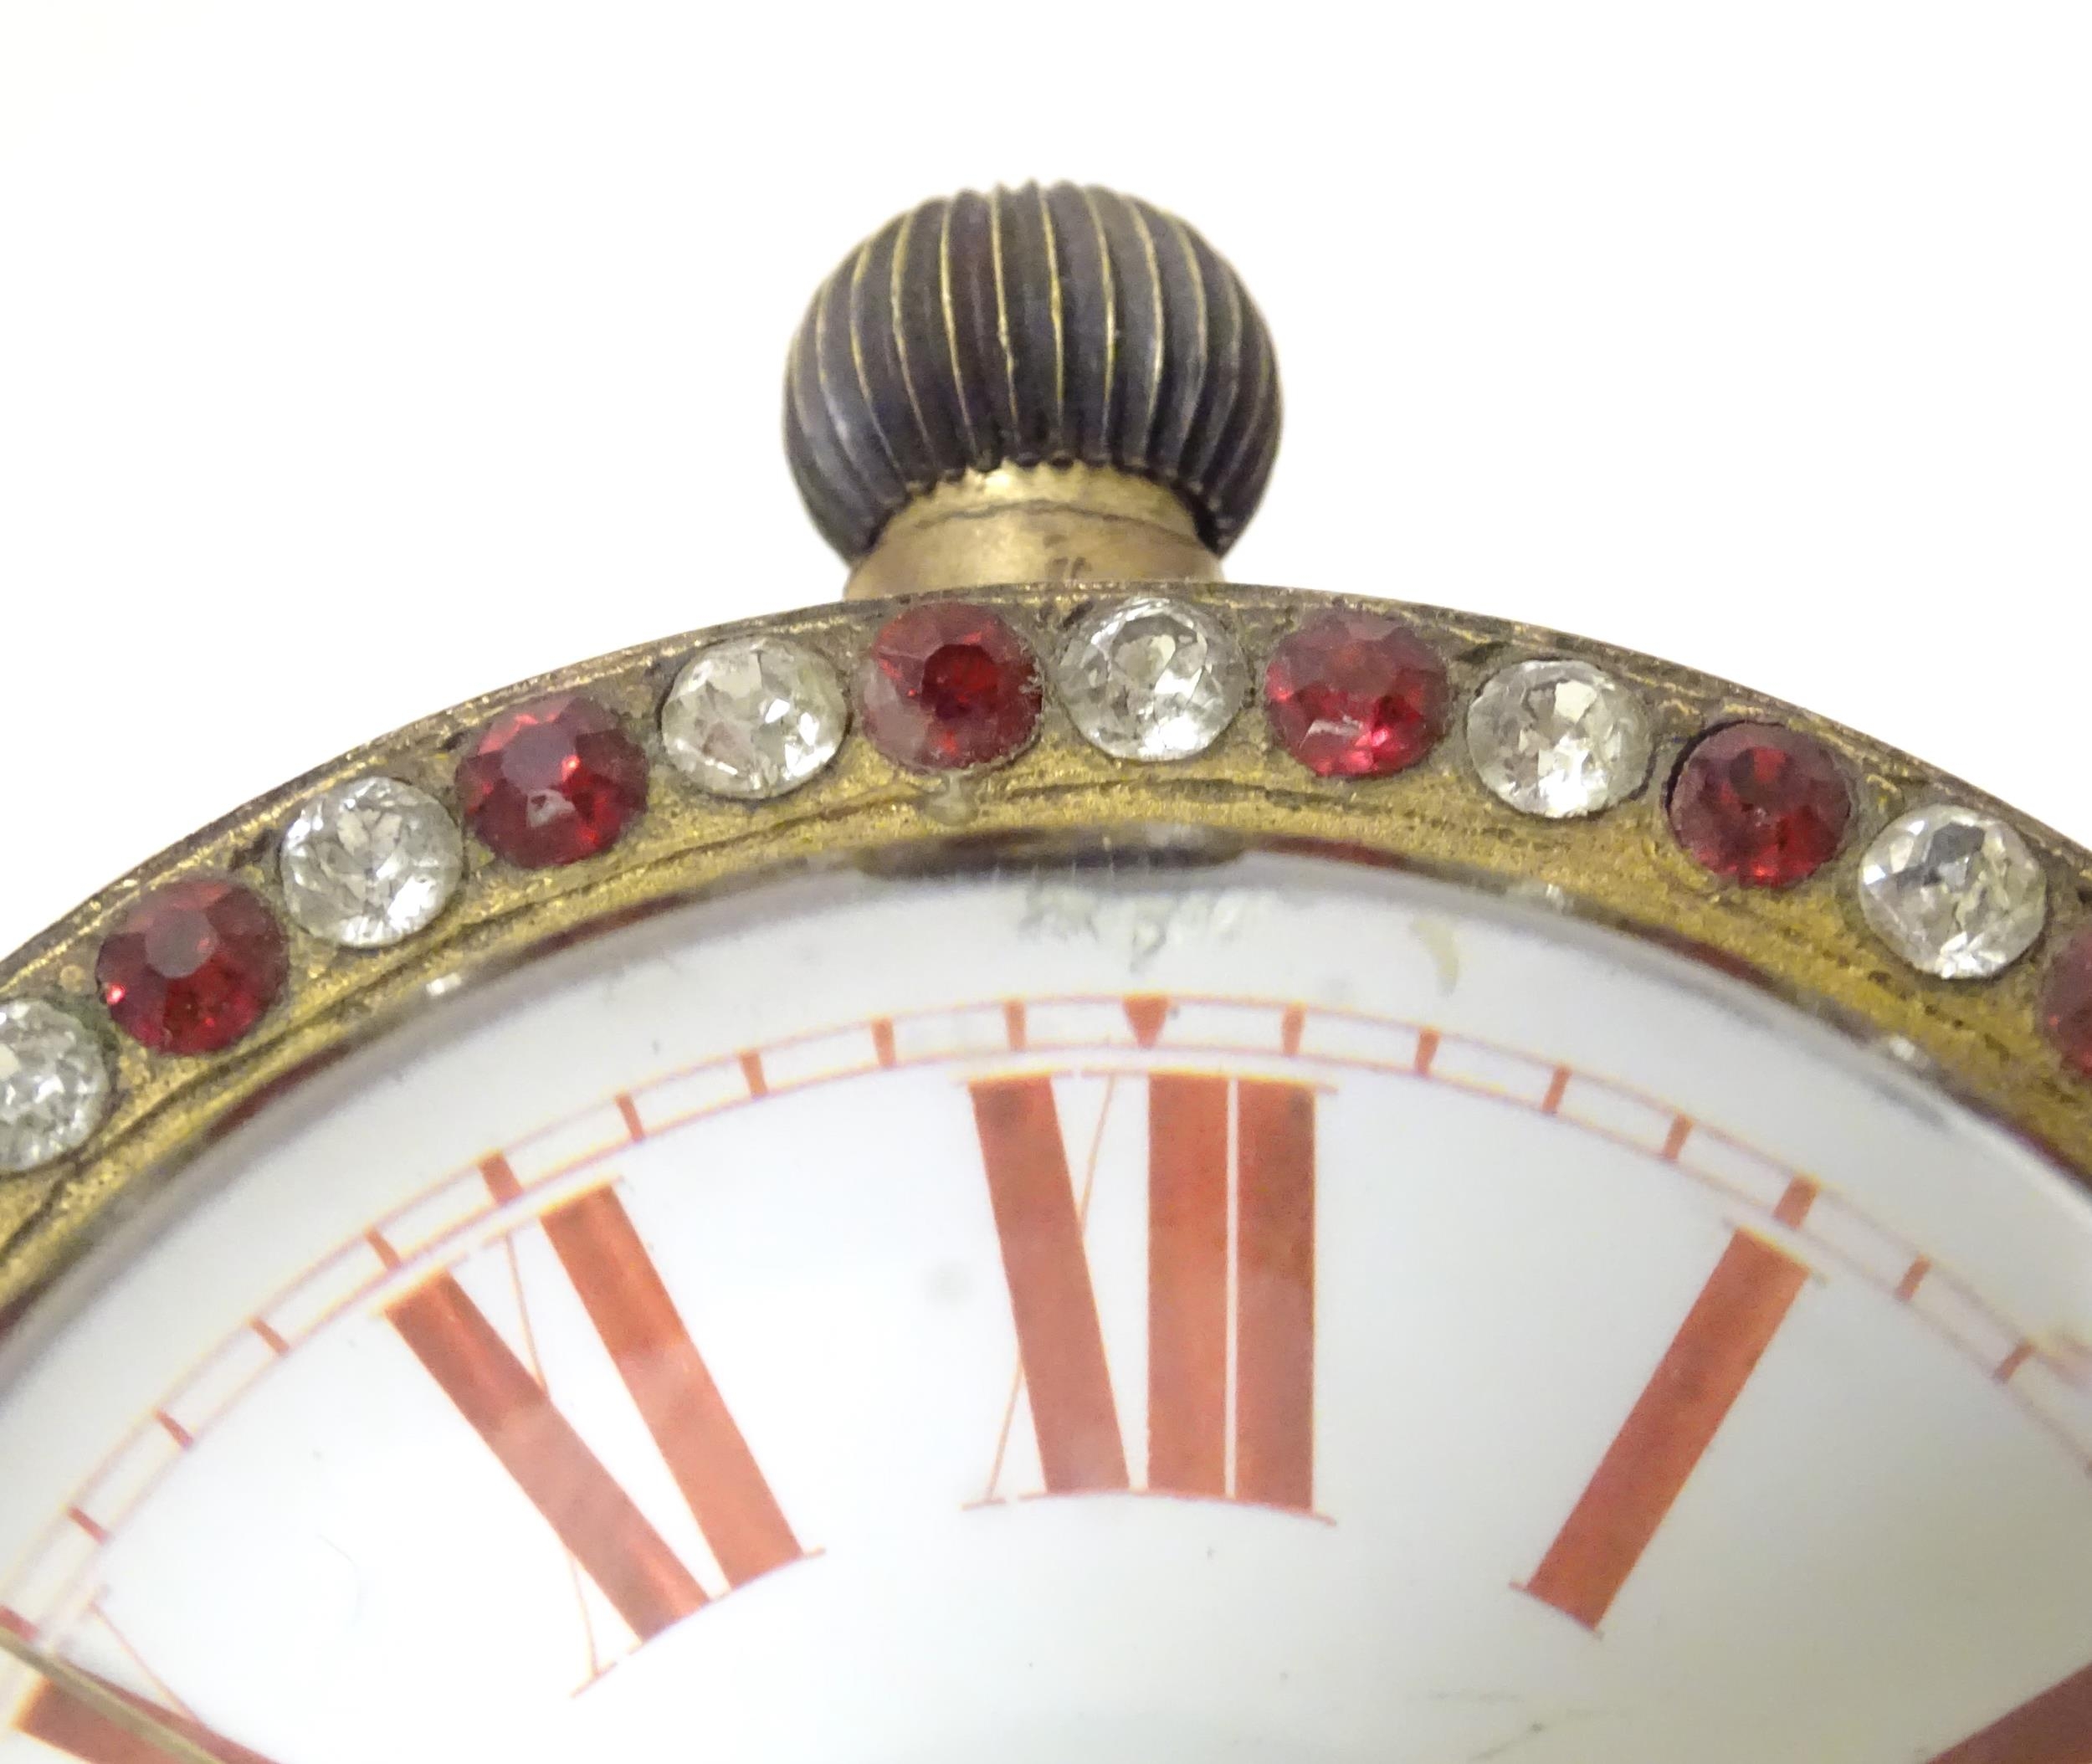 A bulls eye pocket / desk watch, the dial signed J. N Masters Ltd. Rye Sussex the surround decorated - Image 9 of 11